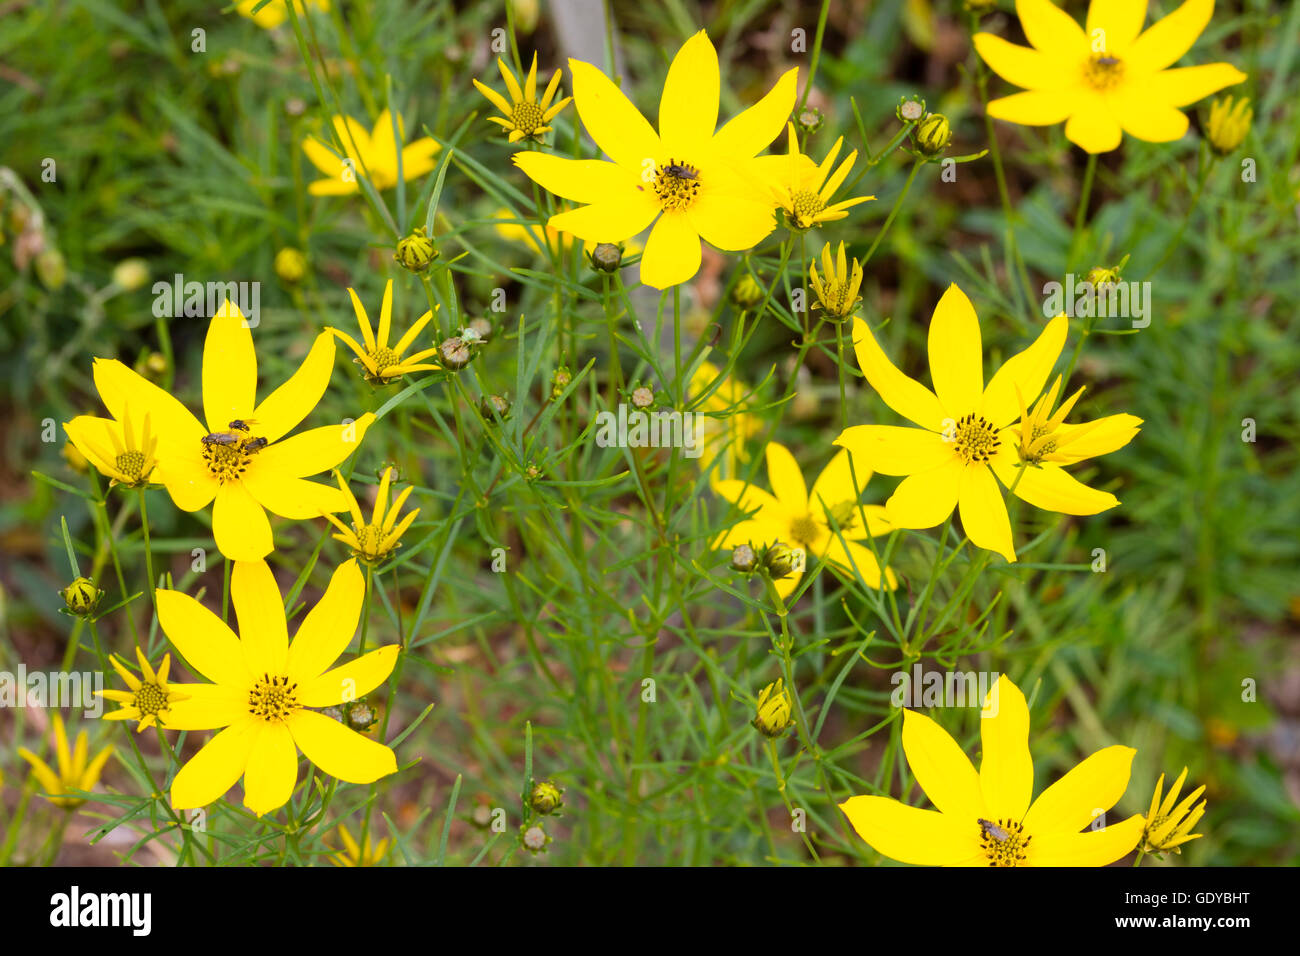 Close up of the yellow daisy flowers of tickseed, Coreopsis verticillata Stock Photo